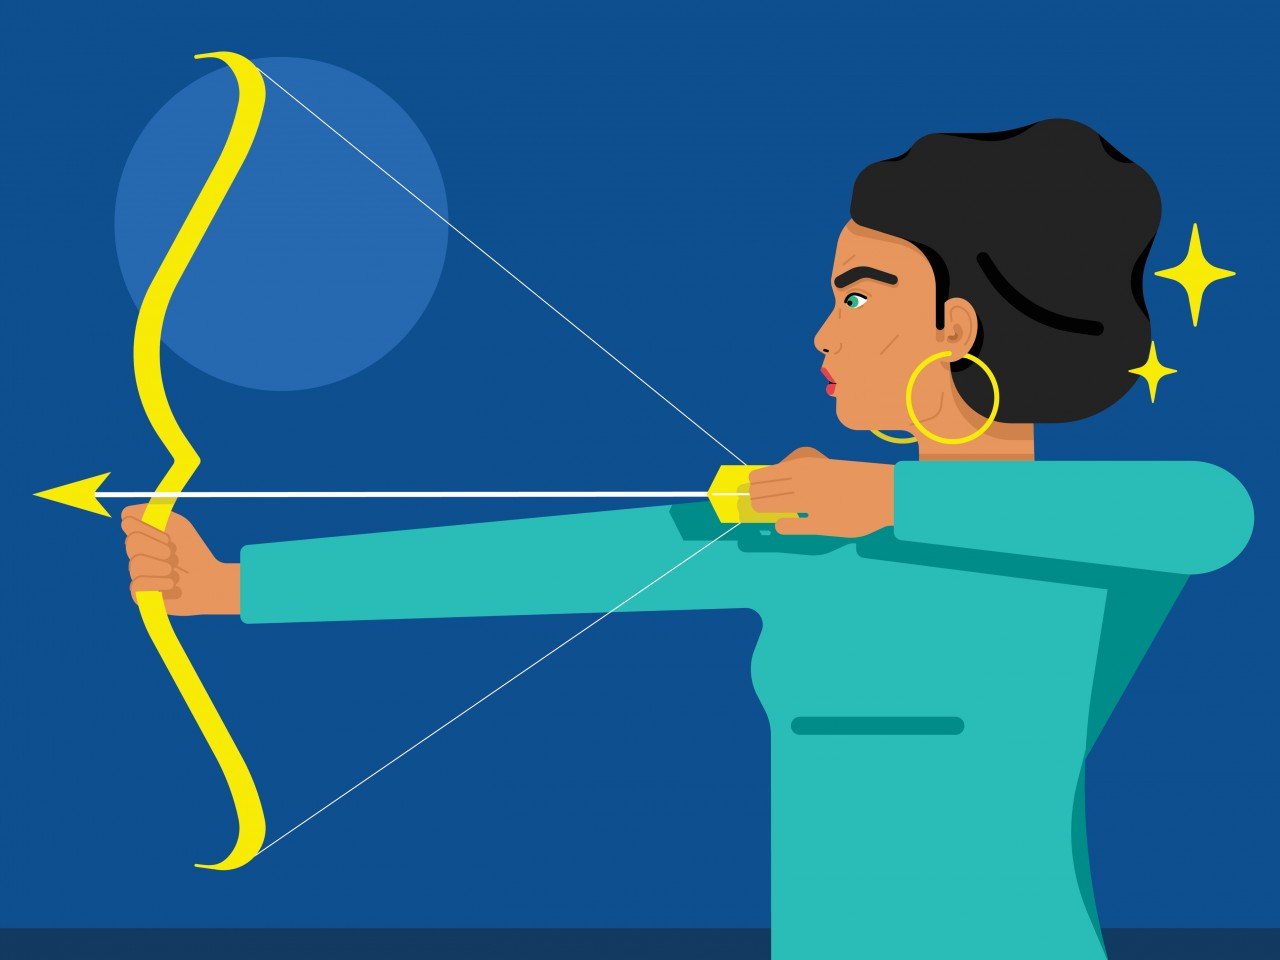 A woman holding a bow and arrow represents the astrological sign of Sagittarius